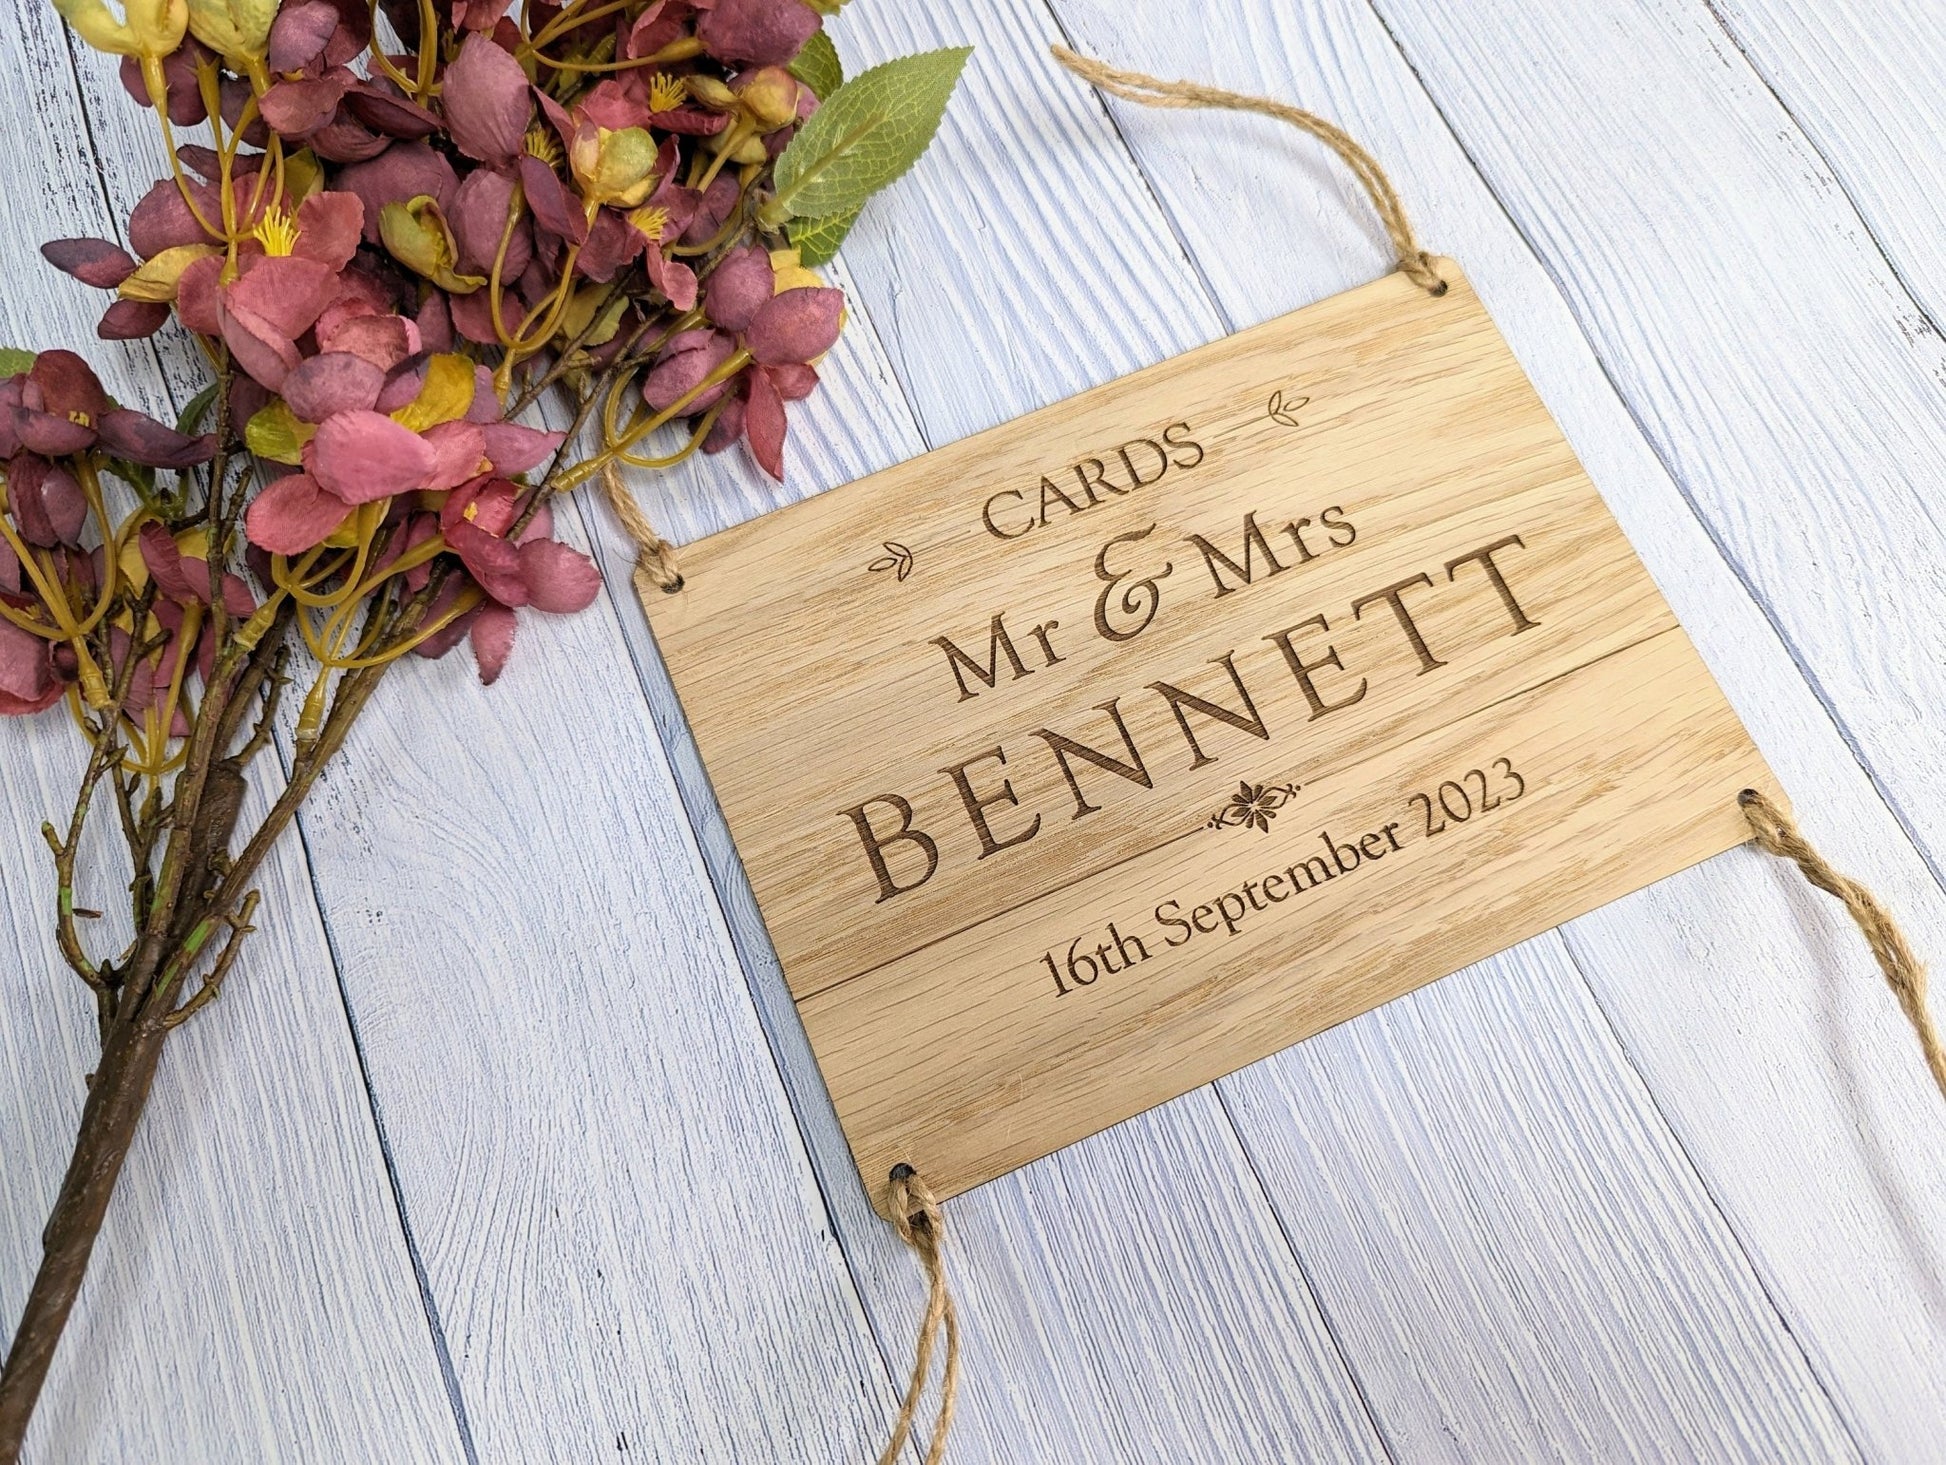 Personalised Wooden Wedding Card Box Sign with String Attachment - Customisable with Married Name & Date - CherryGroveCraft